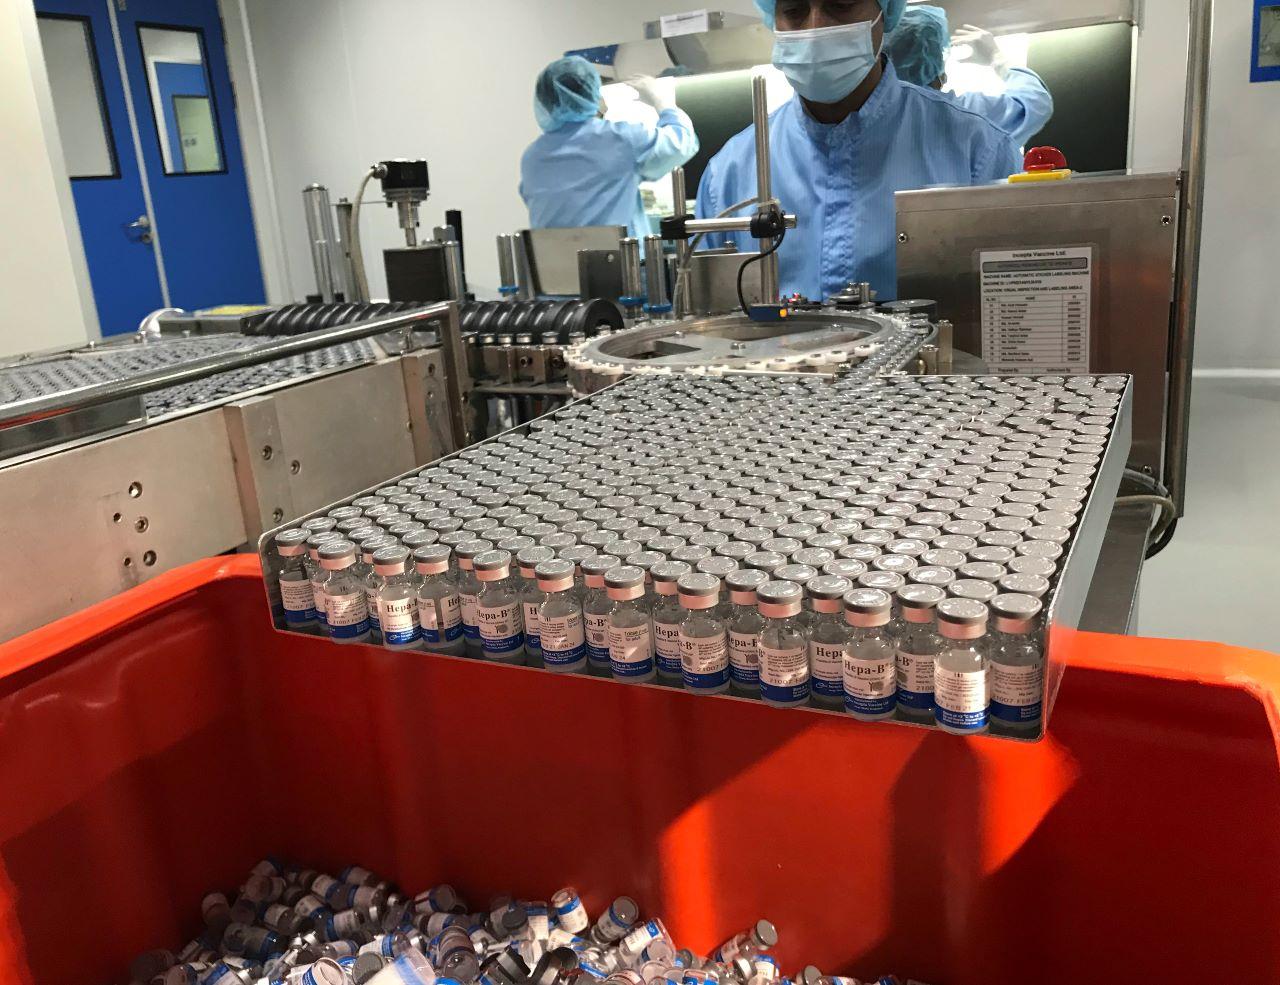 Production personnel label inspected vaccine vials at the Incepta plant on the outskirts of Dhaka in Bangladesh, Feb 13. Nearly 150 sex workers are said to have received their first shot of the AstraZeneca/Oxford vaccine. Photo: AP